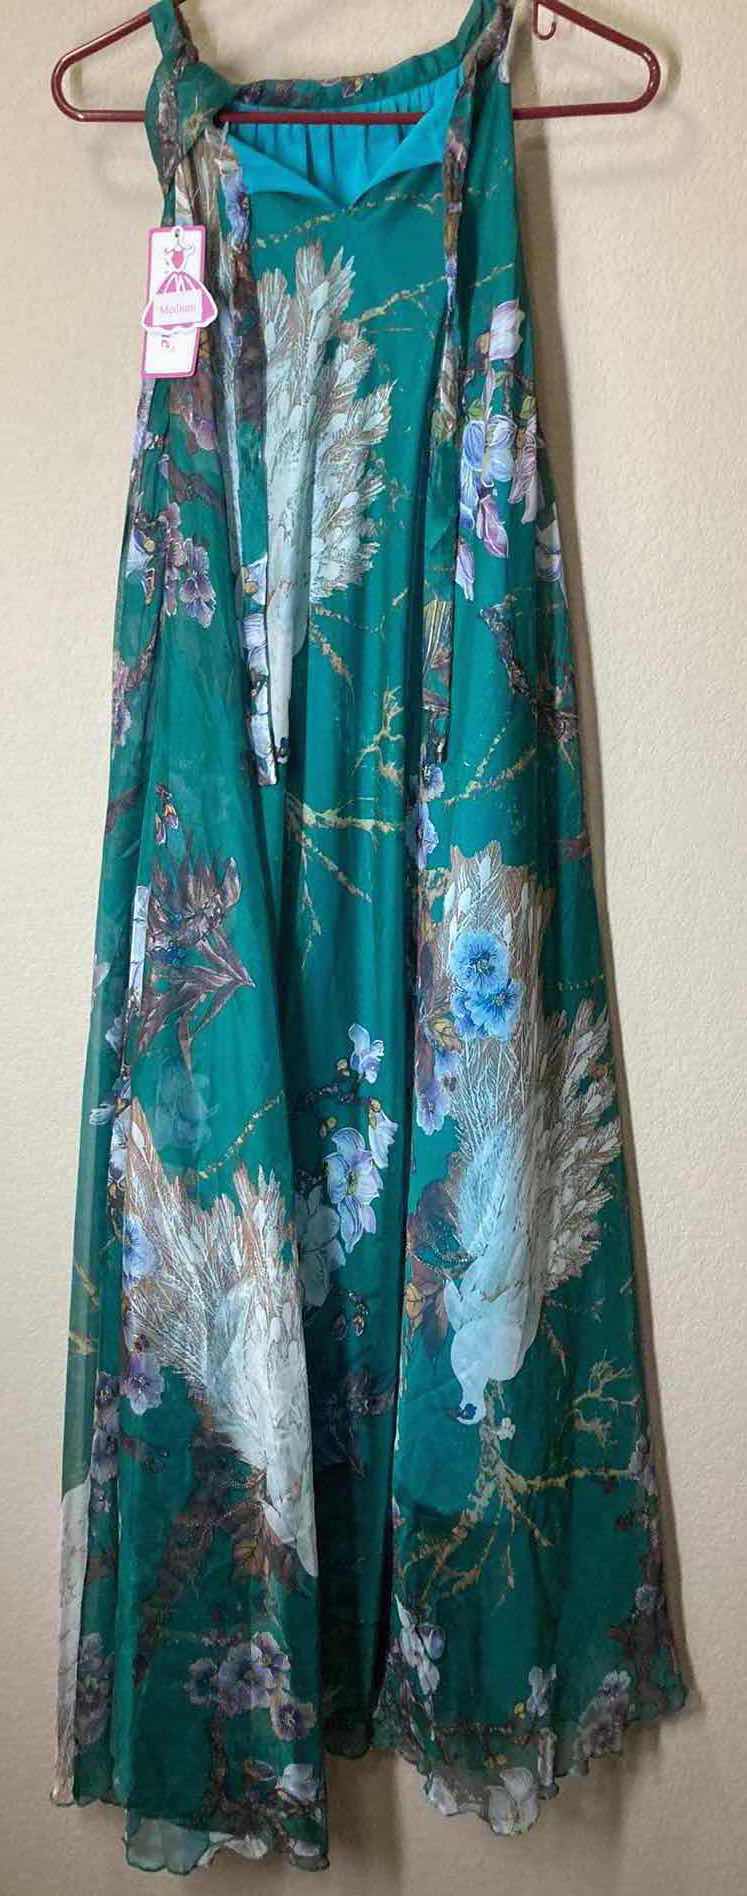 Photo 1 of NEW MEDESHE PEACOCK & FLORAL TRANSPARENT DRESS WOMENS SIZE MEDIUM